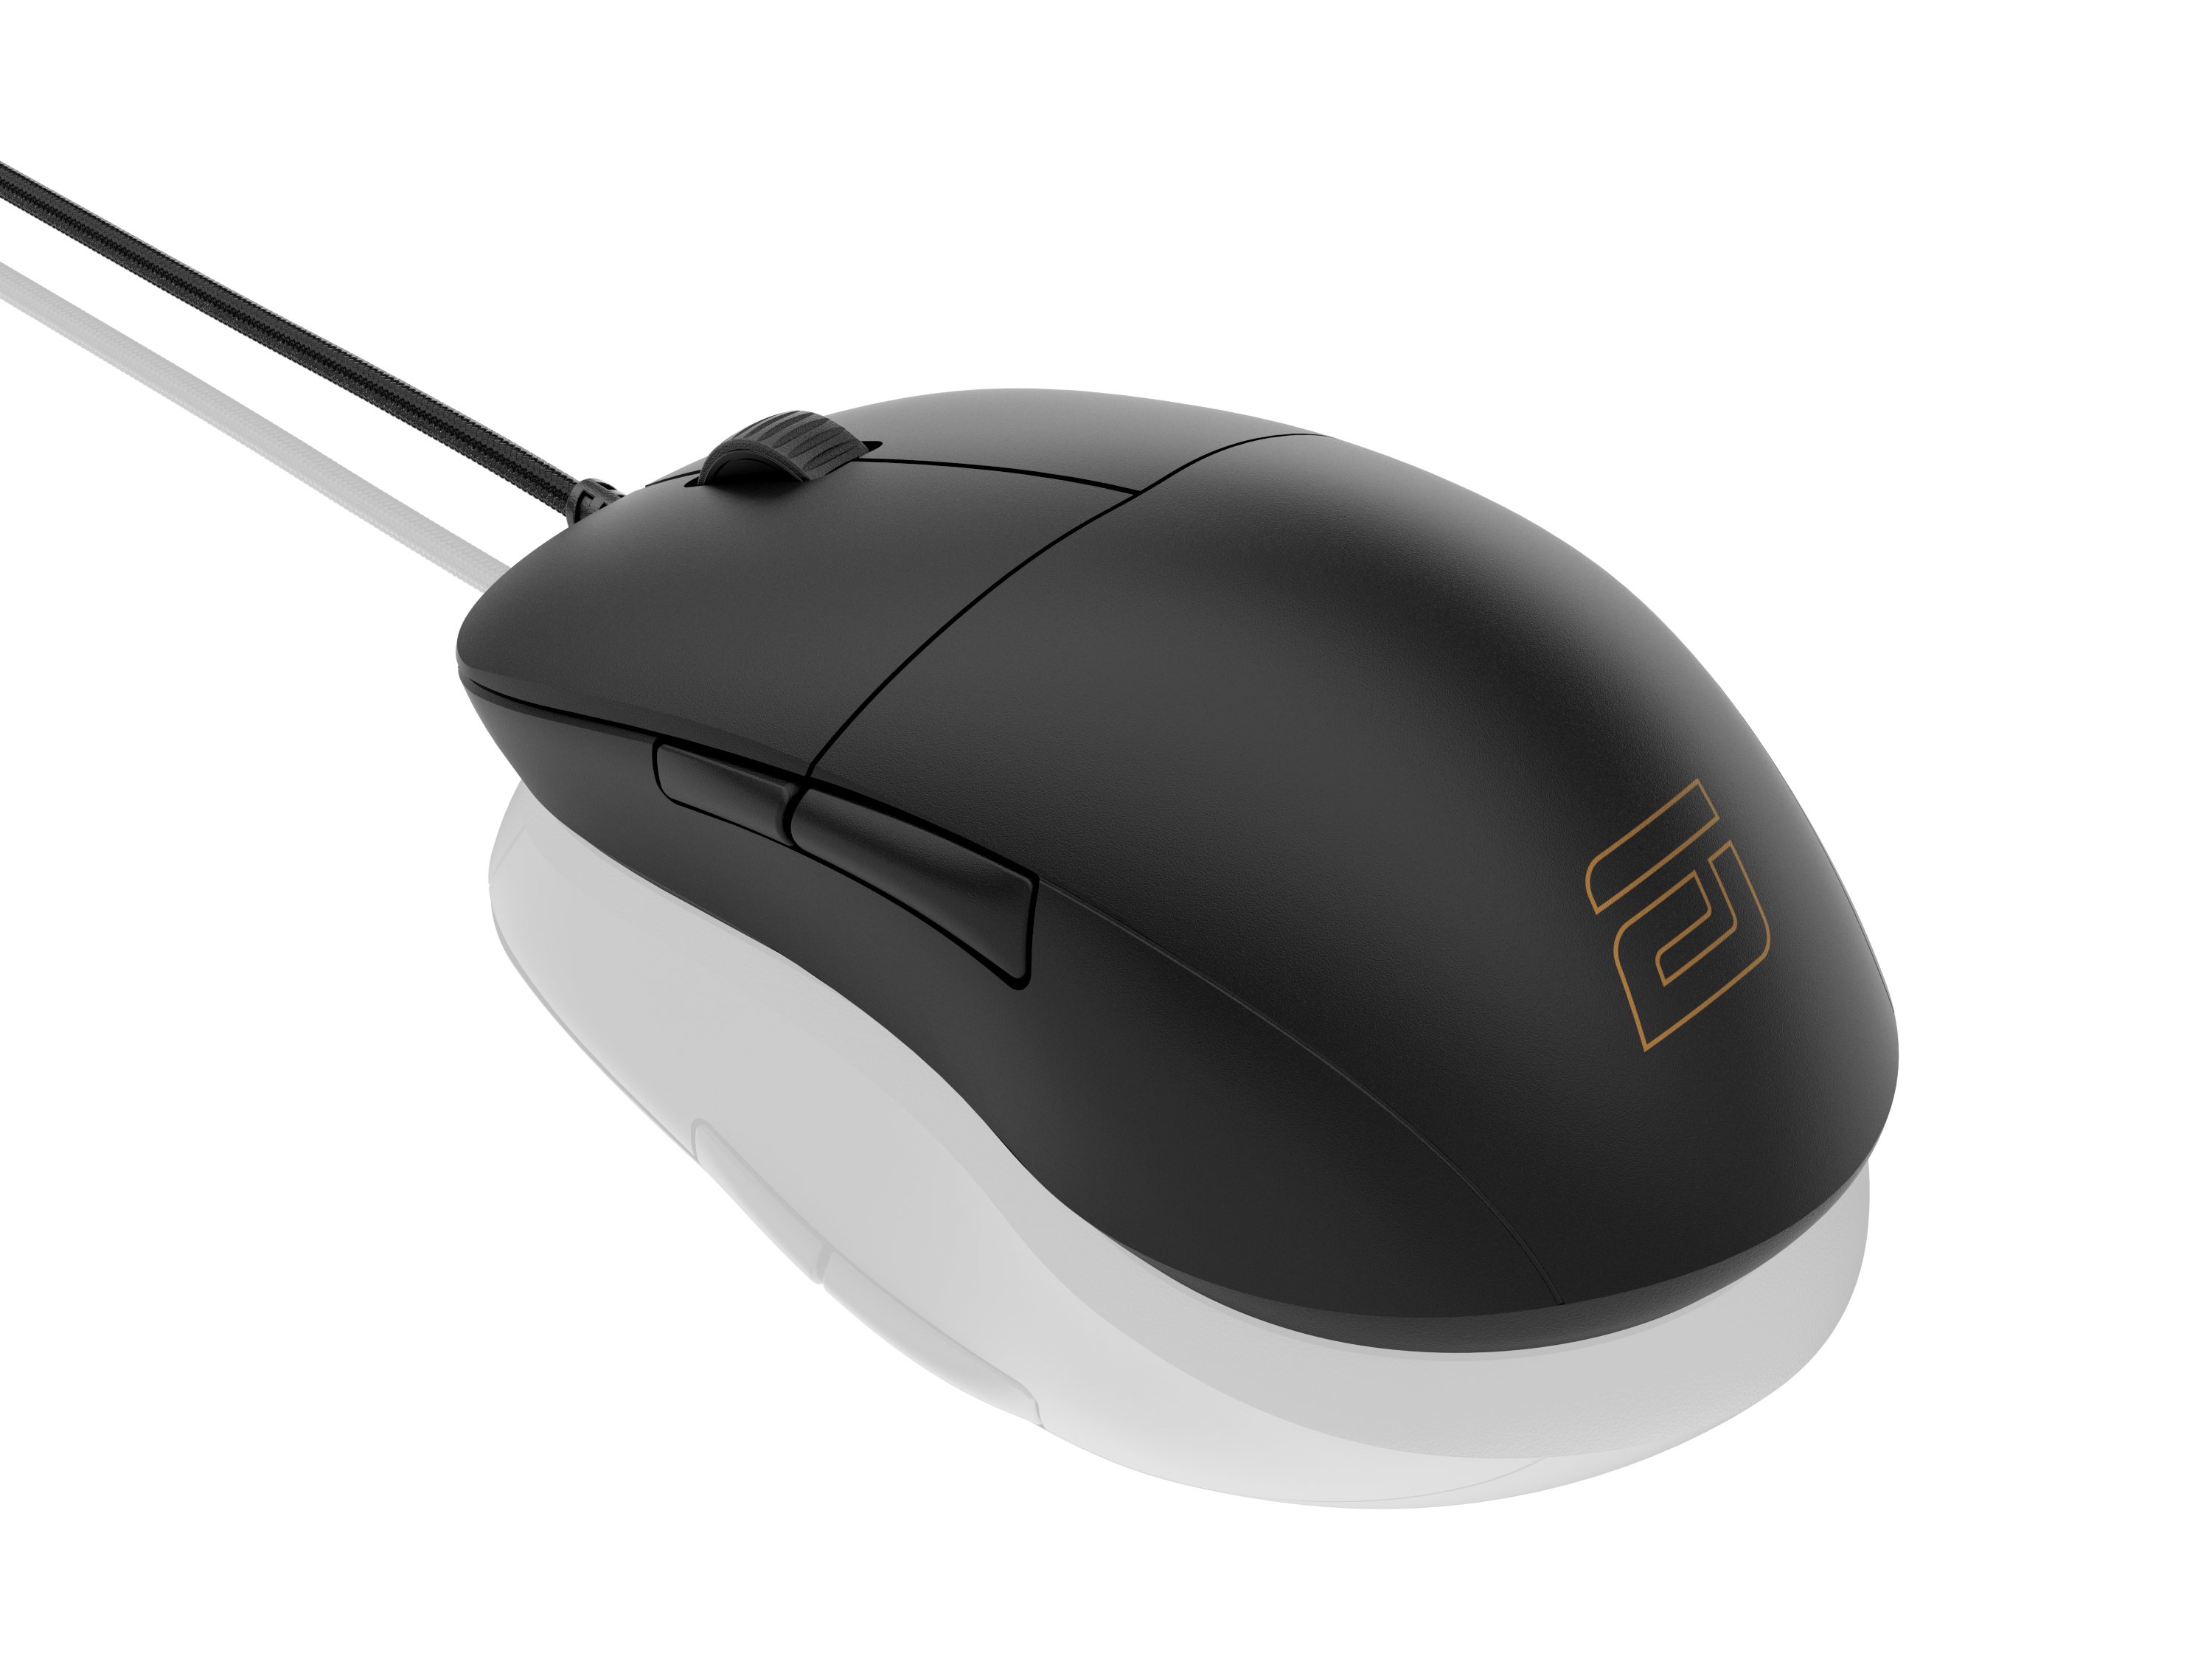 XM1r Gaming Mouse - Black